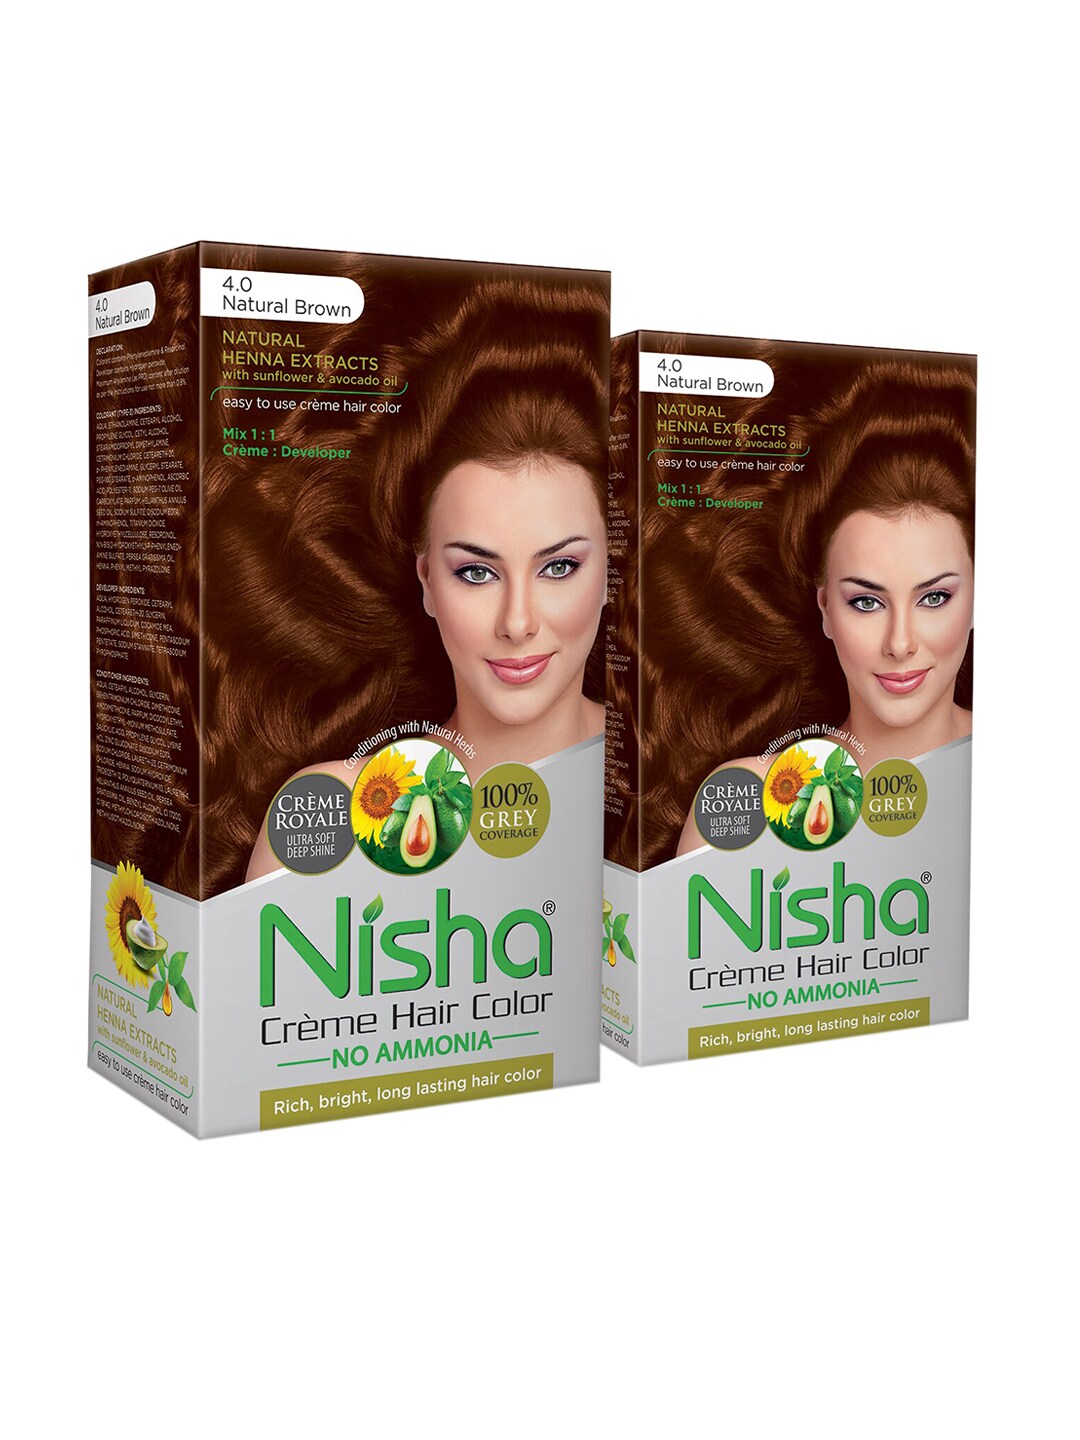 Nisha Women  Pack of 2 Creme Hair Color 120gm each- Natural Brown Price in India